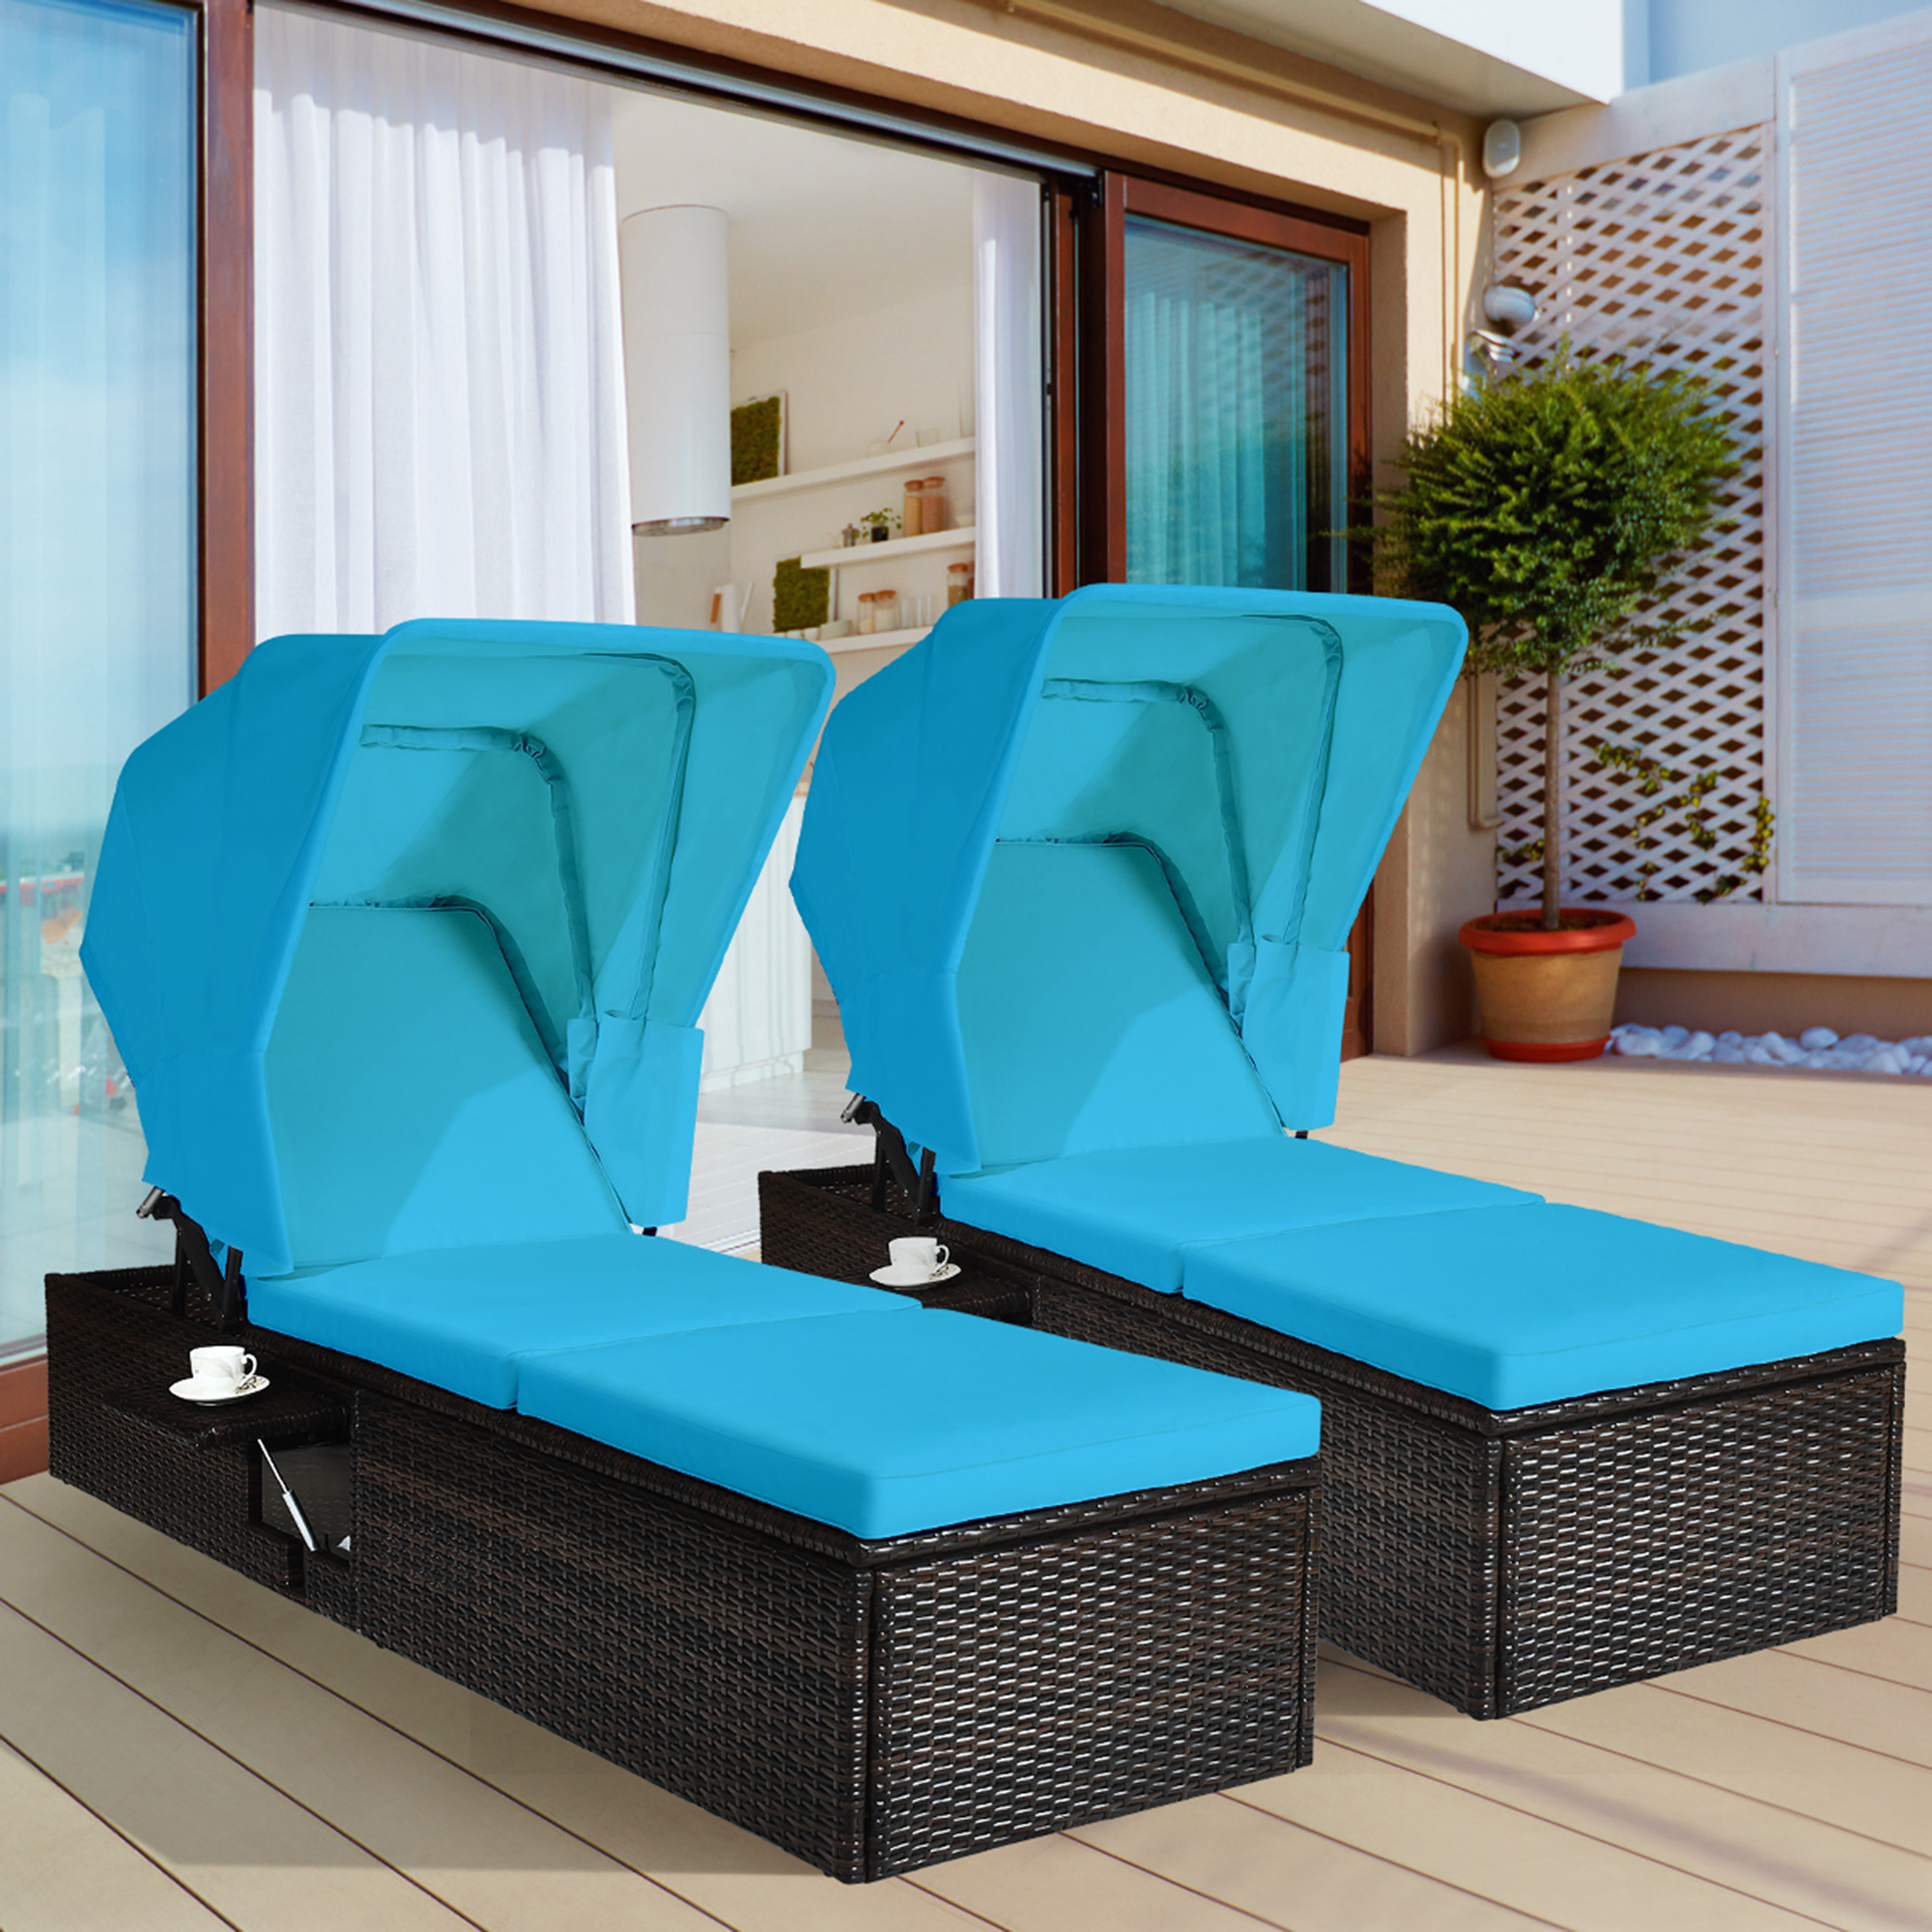 Gymax 2PCS Rattan Patio Chaise Lounge Chair W/ Adjustable Canopy Turquoise Cushion - image 1 of 10